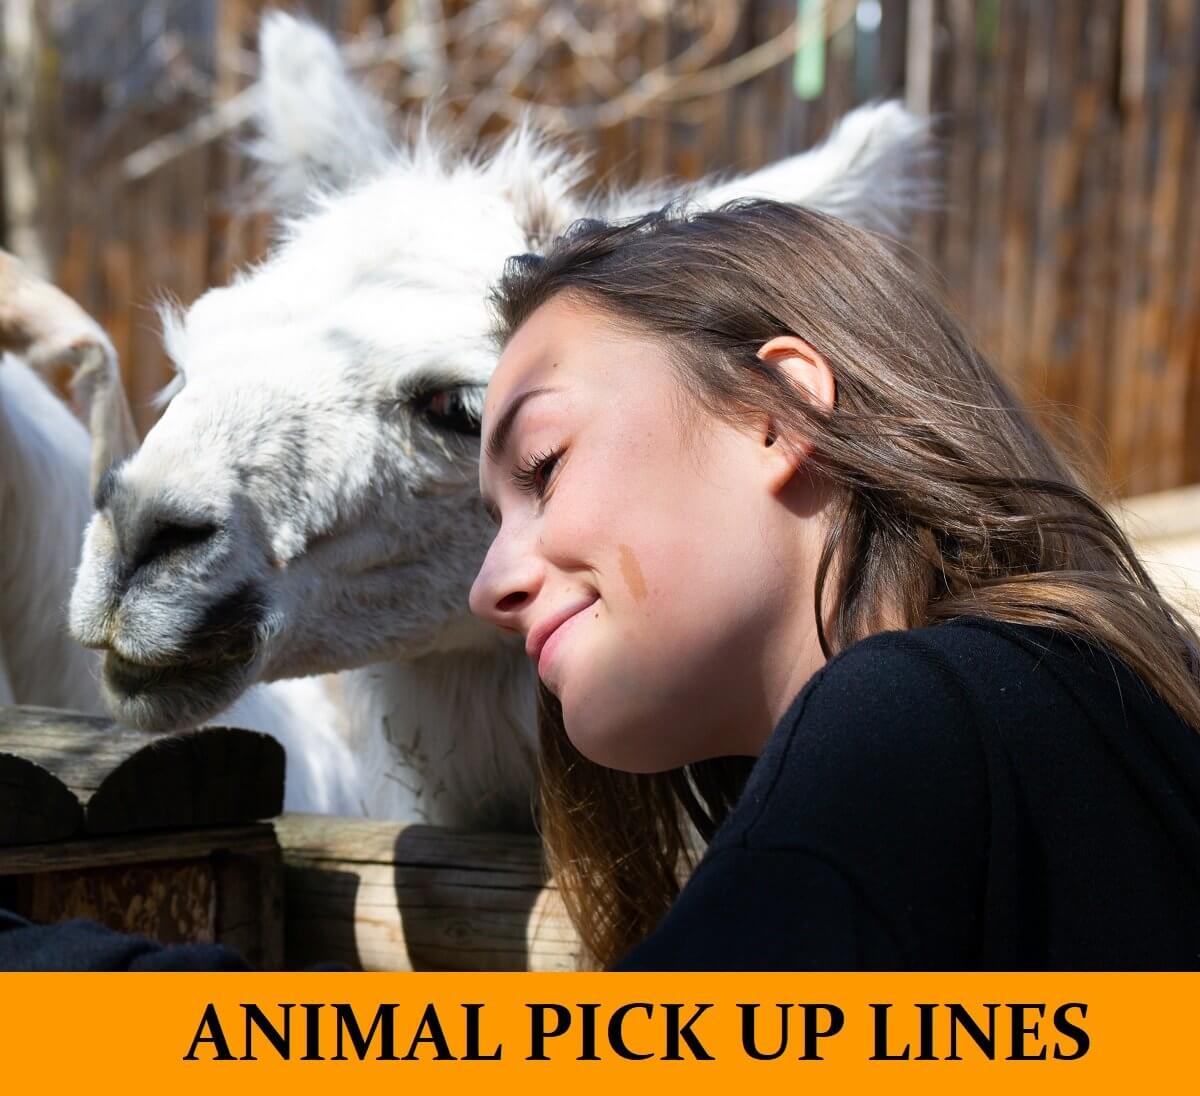 Pick Up Lines Based on Animals